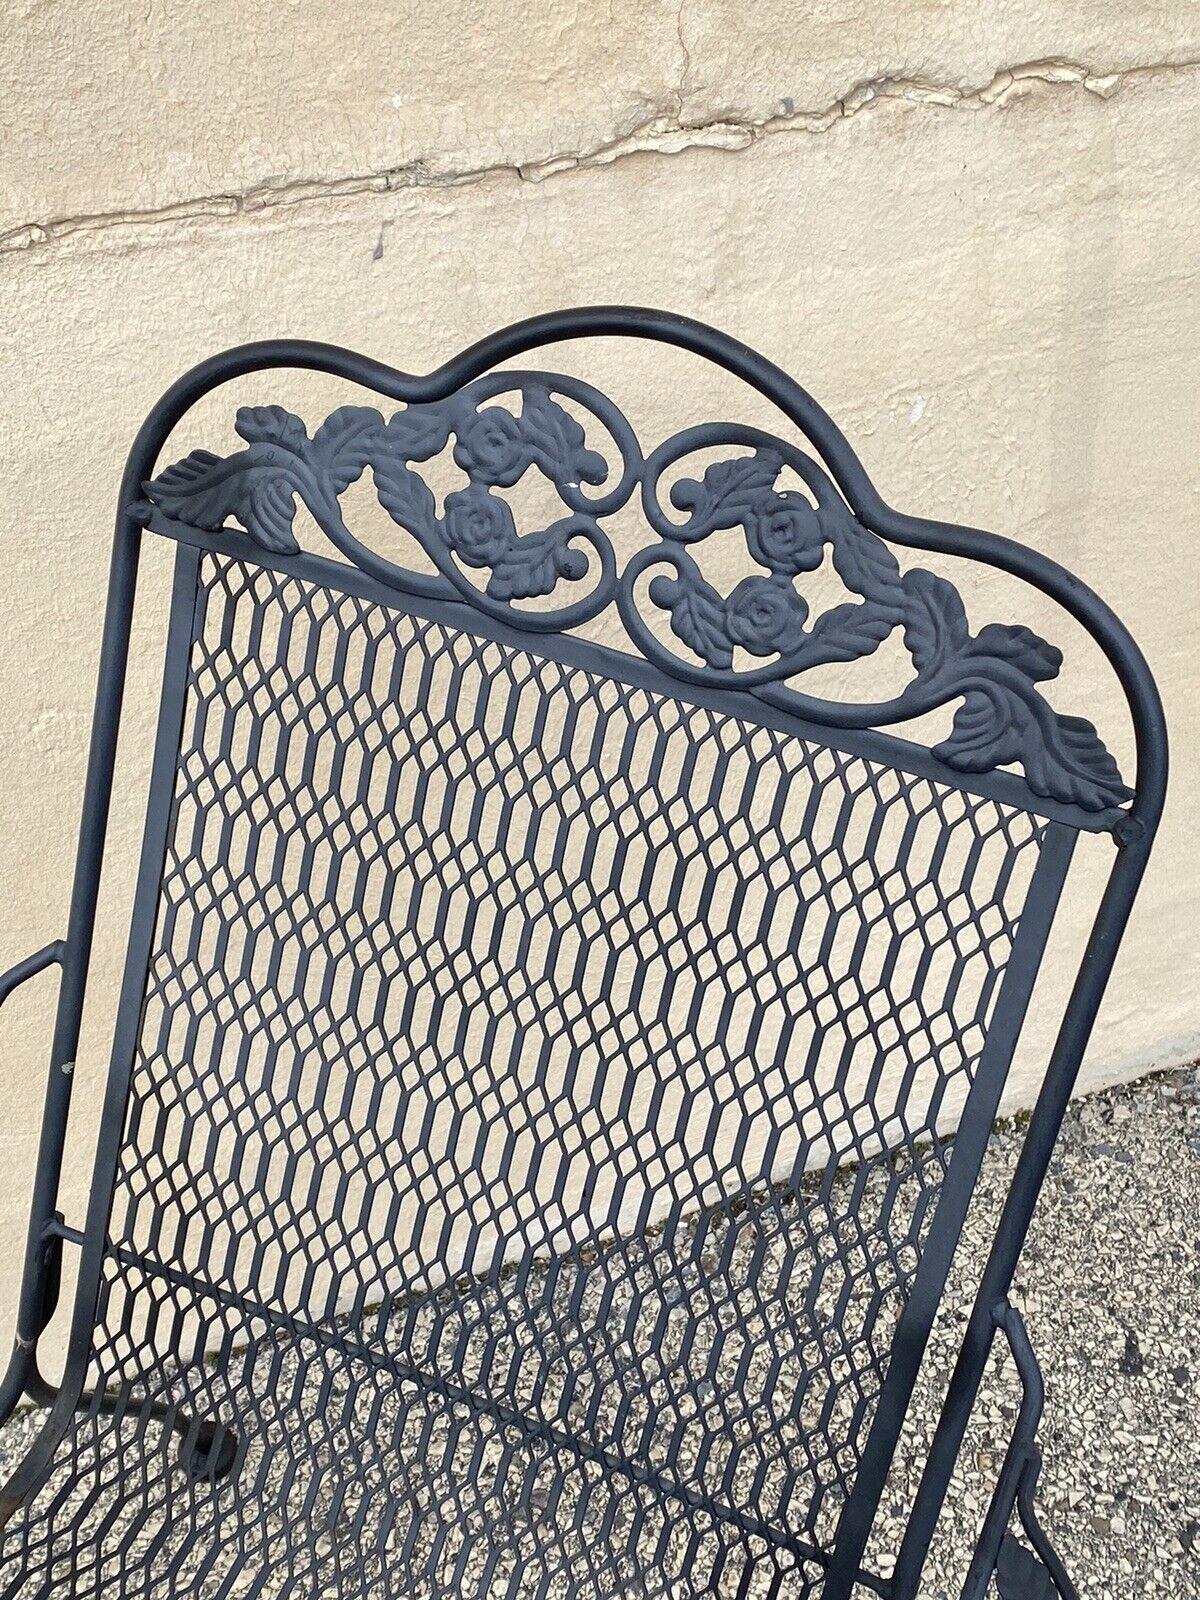 Vintage Wrought Iron Rose and Vine Pattern Garden Patio Chairs - 7 Pc Set For Sale 10